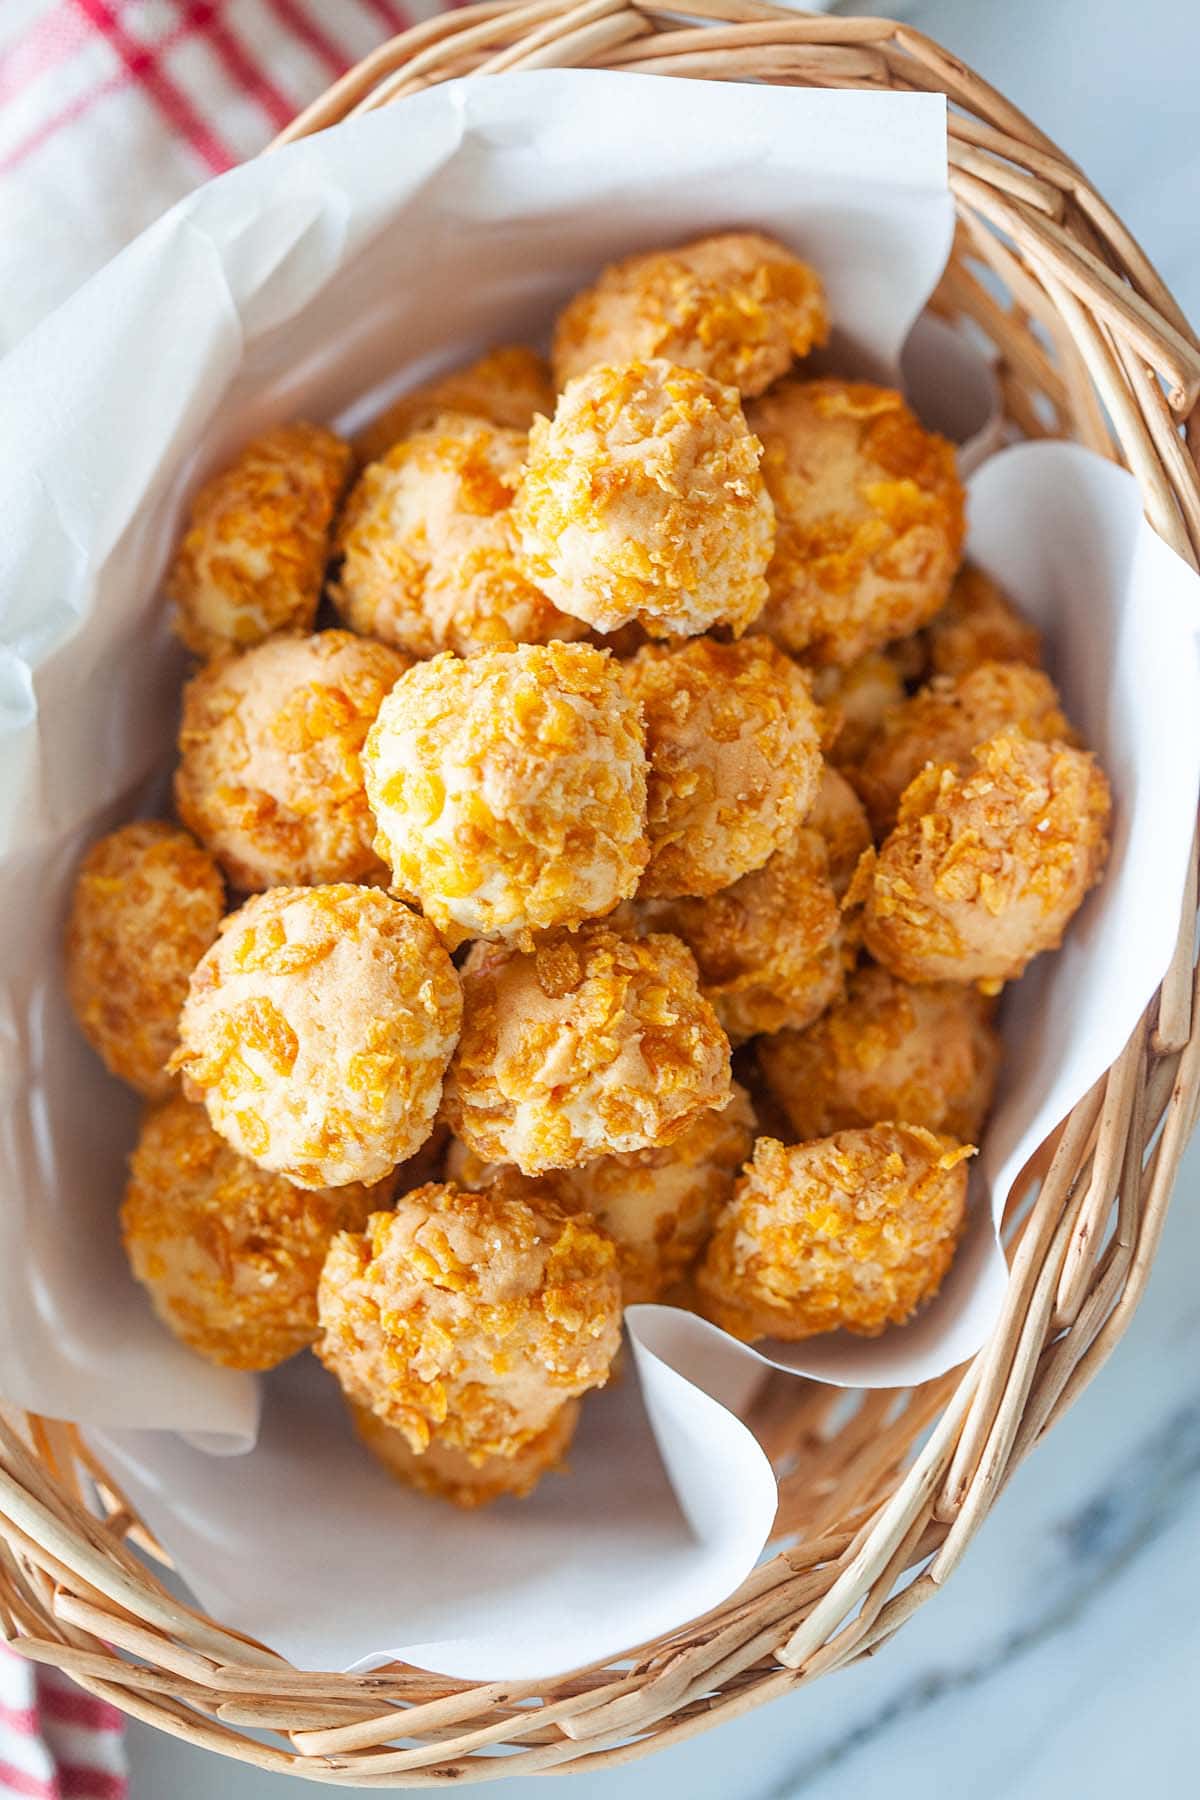 Easy cornflake cookies recipe that yields buttery, crunchy, and tasty cornflake cookies.